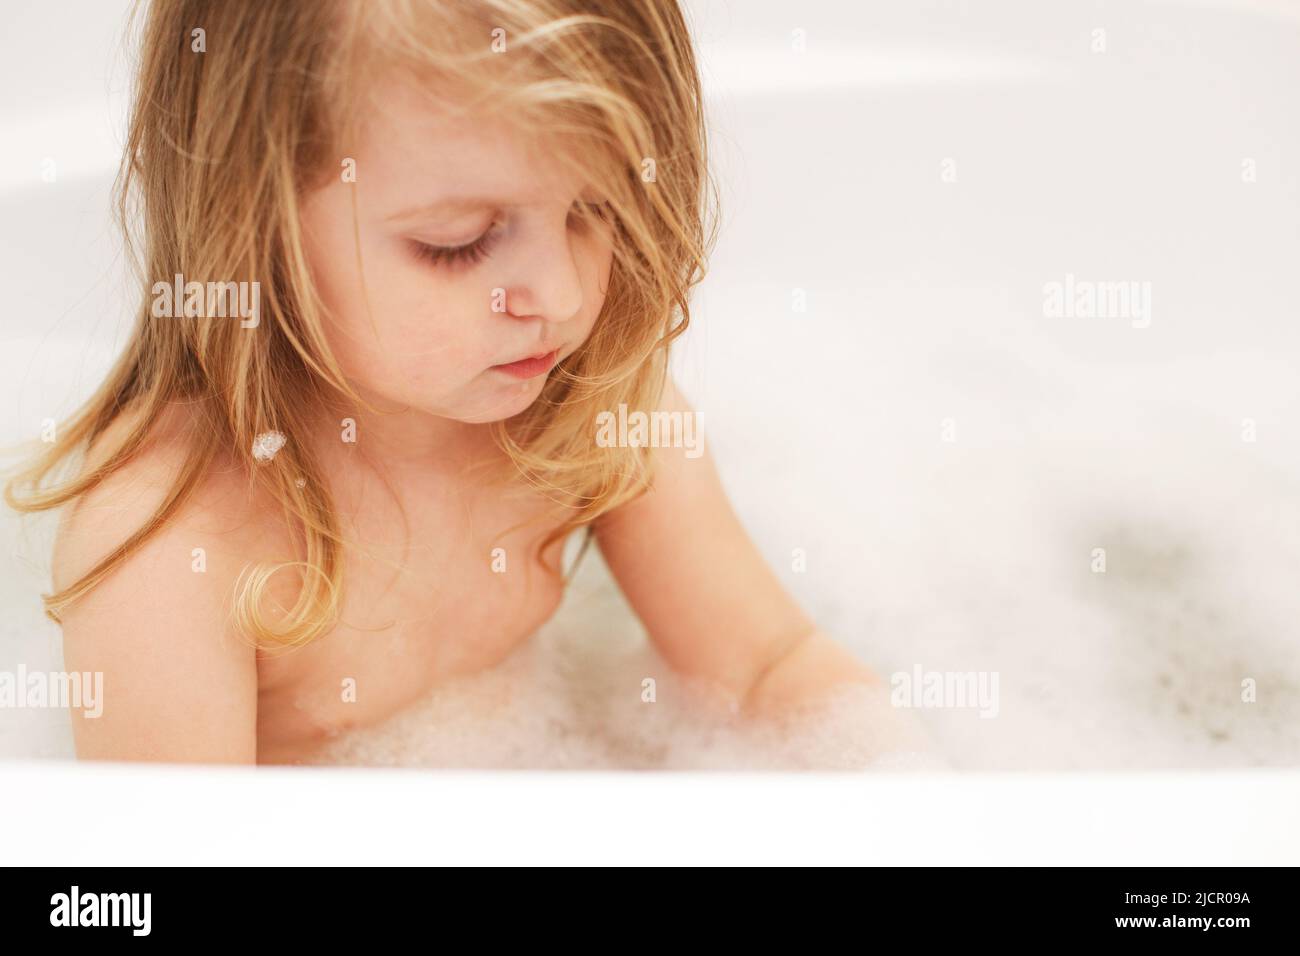 Funny little baby girl with blond hair playing with foam in a bath tub Stock Photo